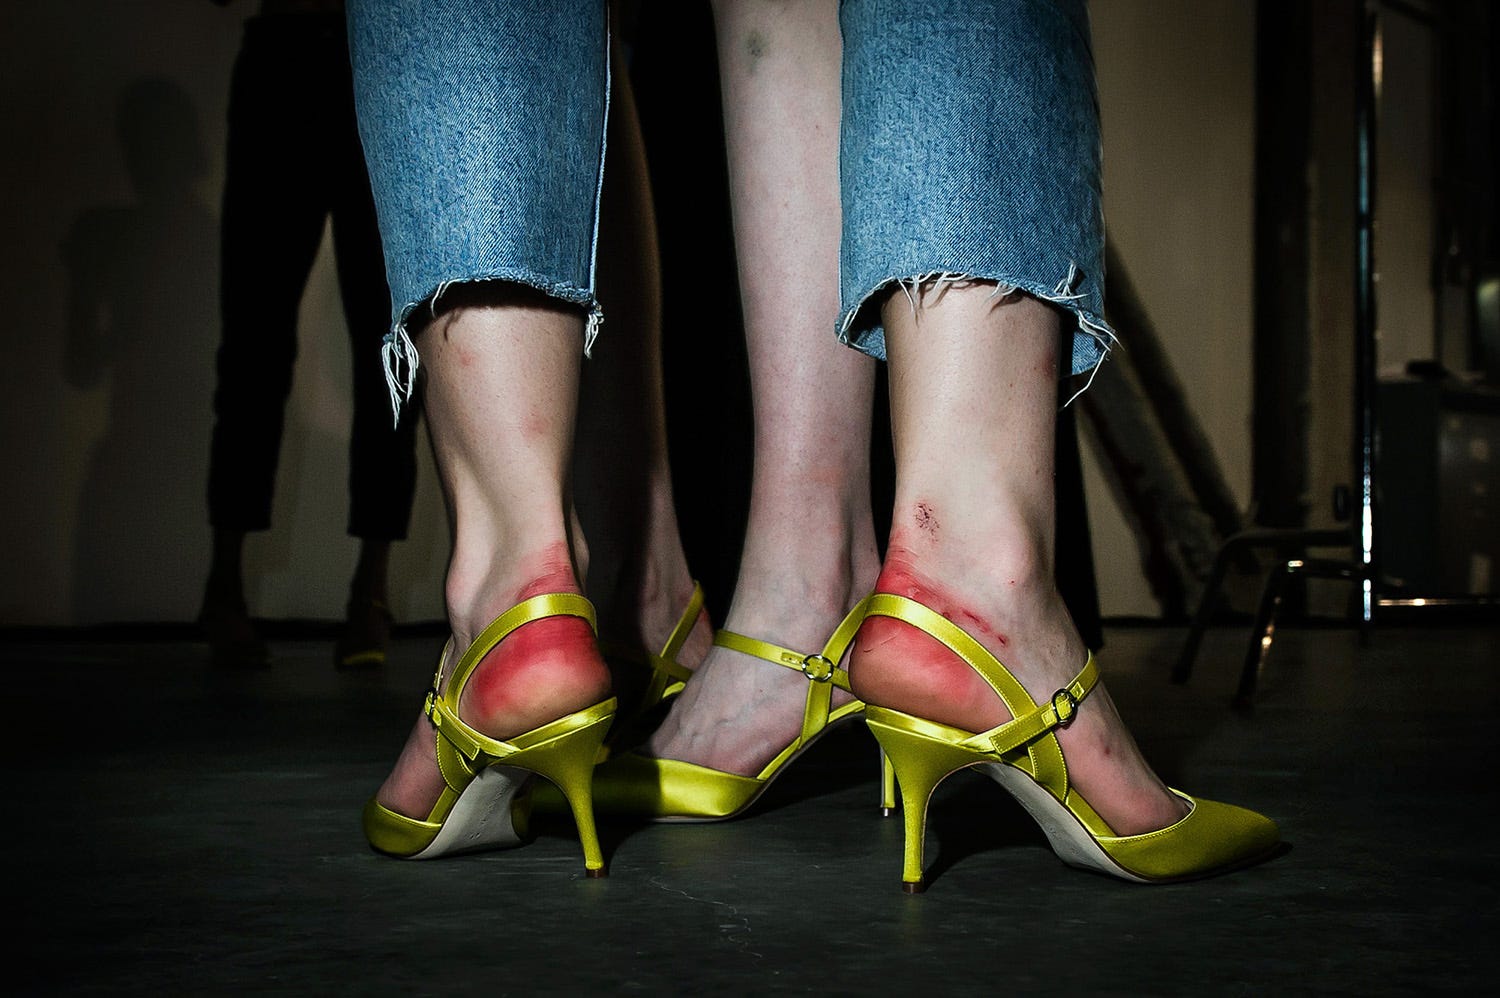 High heels are back for summer from the likes of Vivienne Westwood